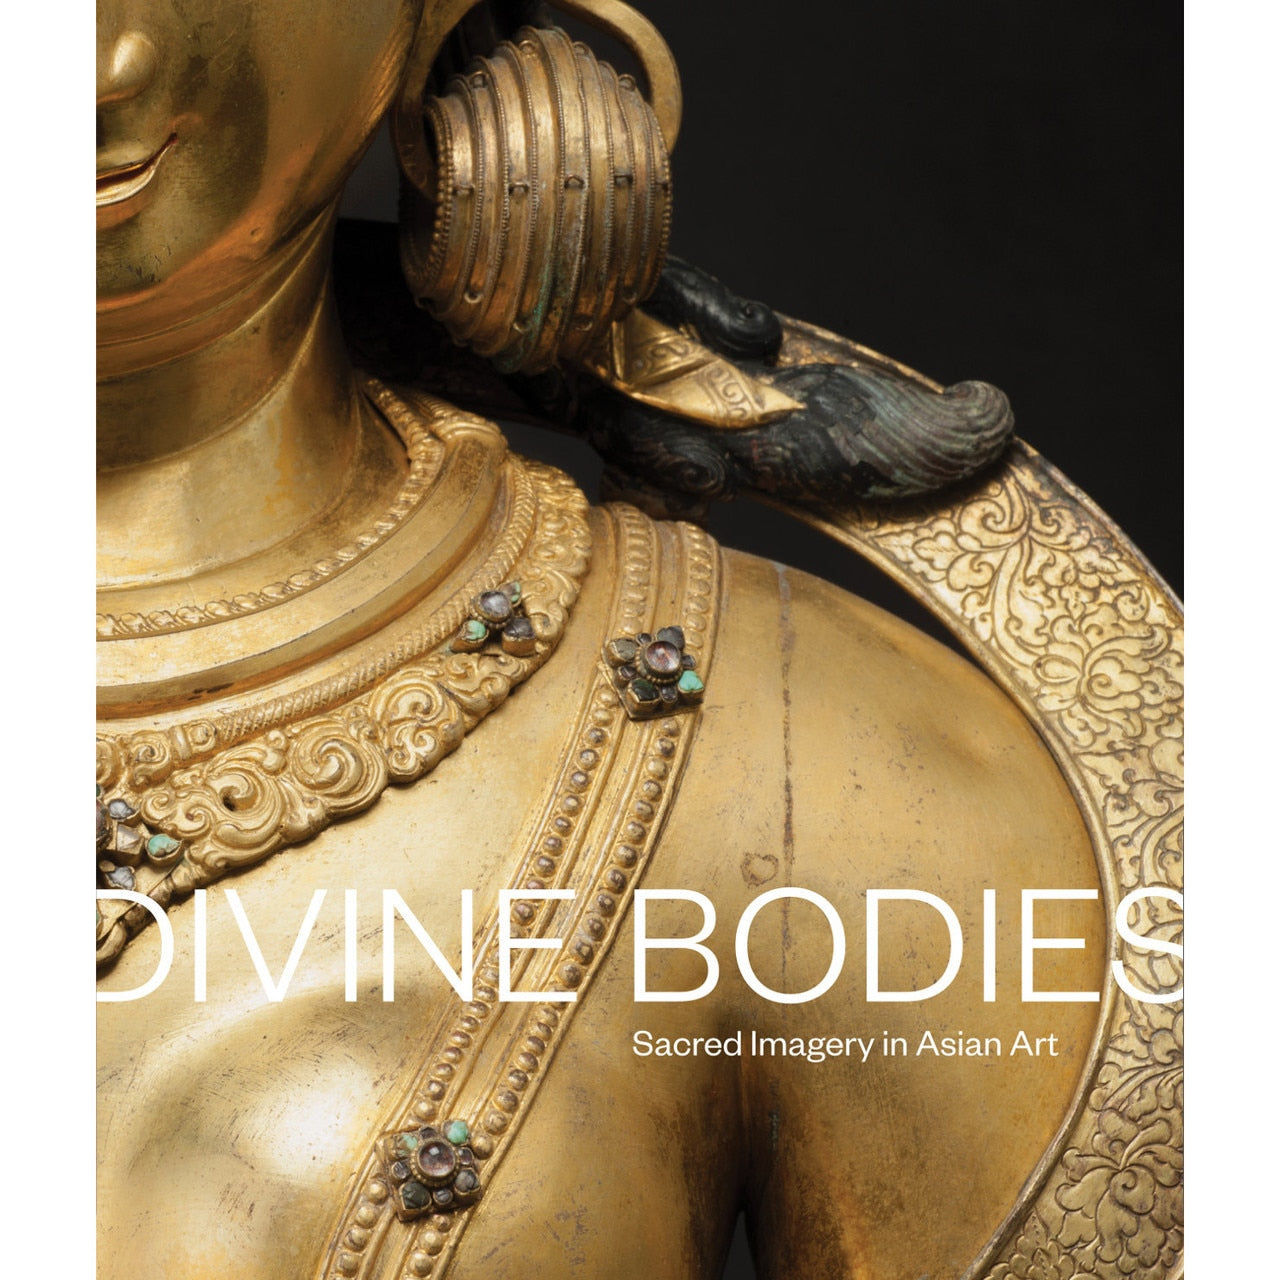 Divine Bodies: Sacred Imagery in Asian Art